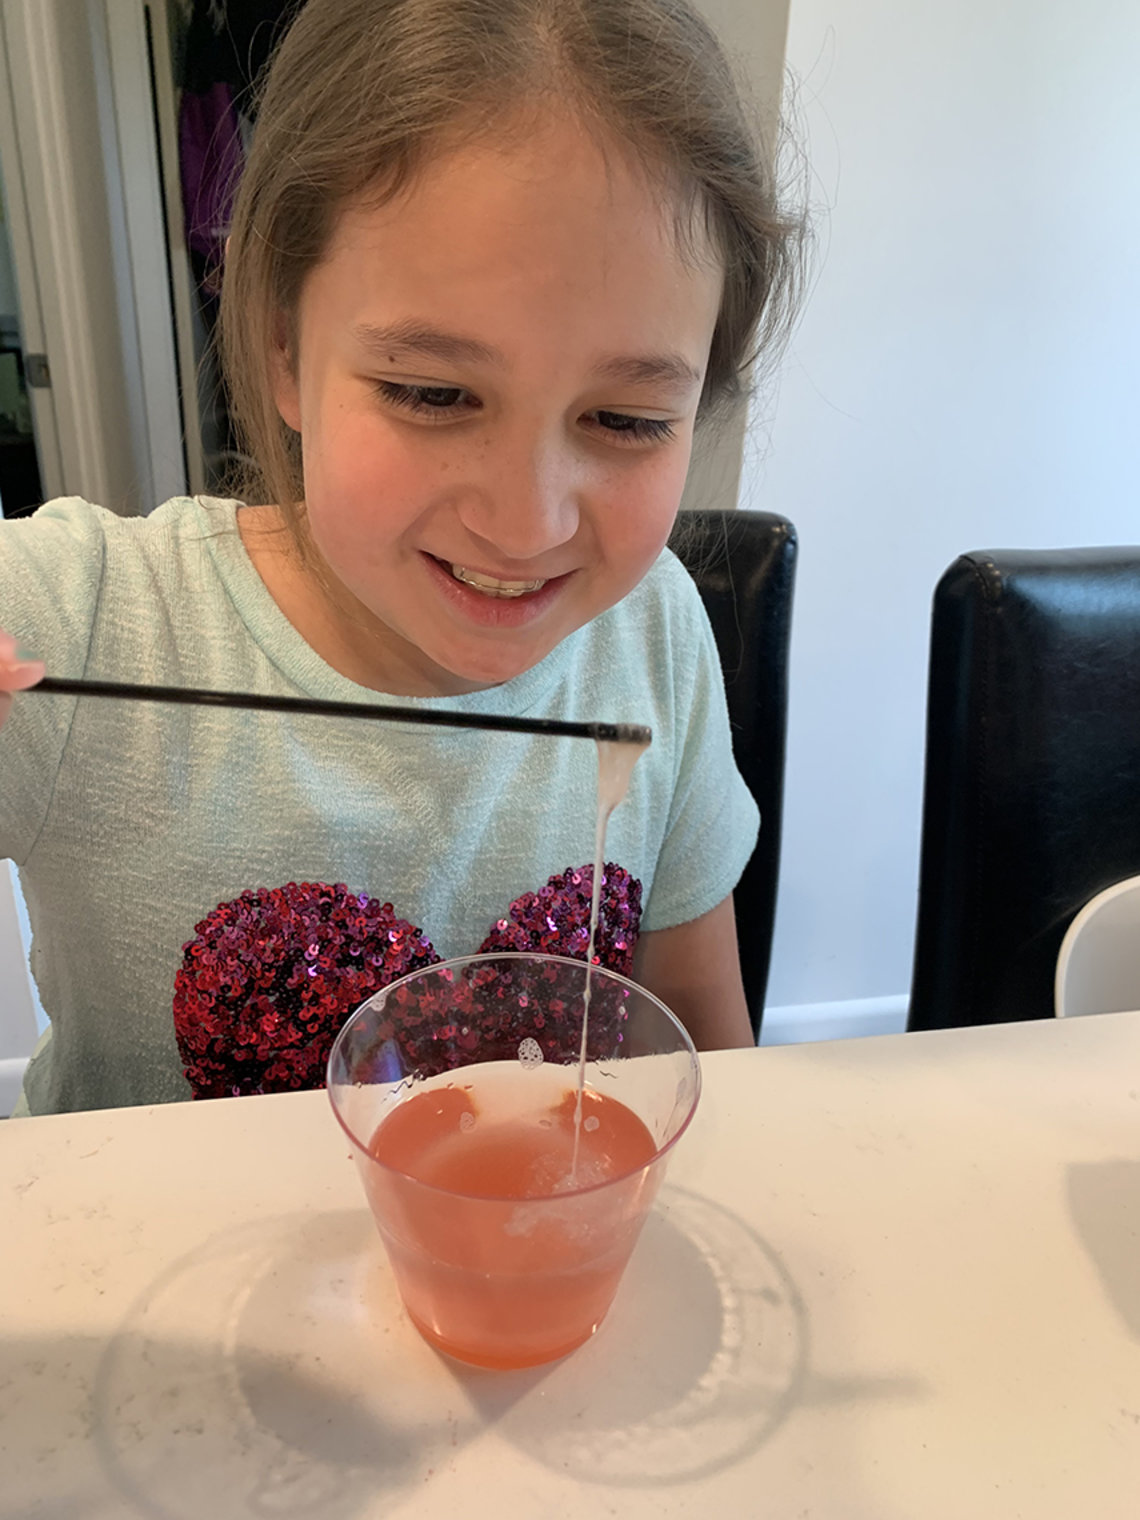 Soper pulls strawberry DNA up out of a clear, plastic cup using a coffee stirrer